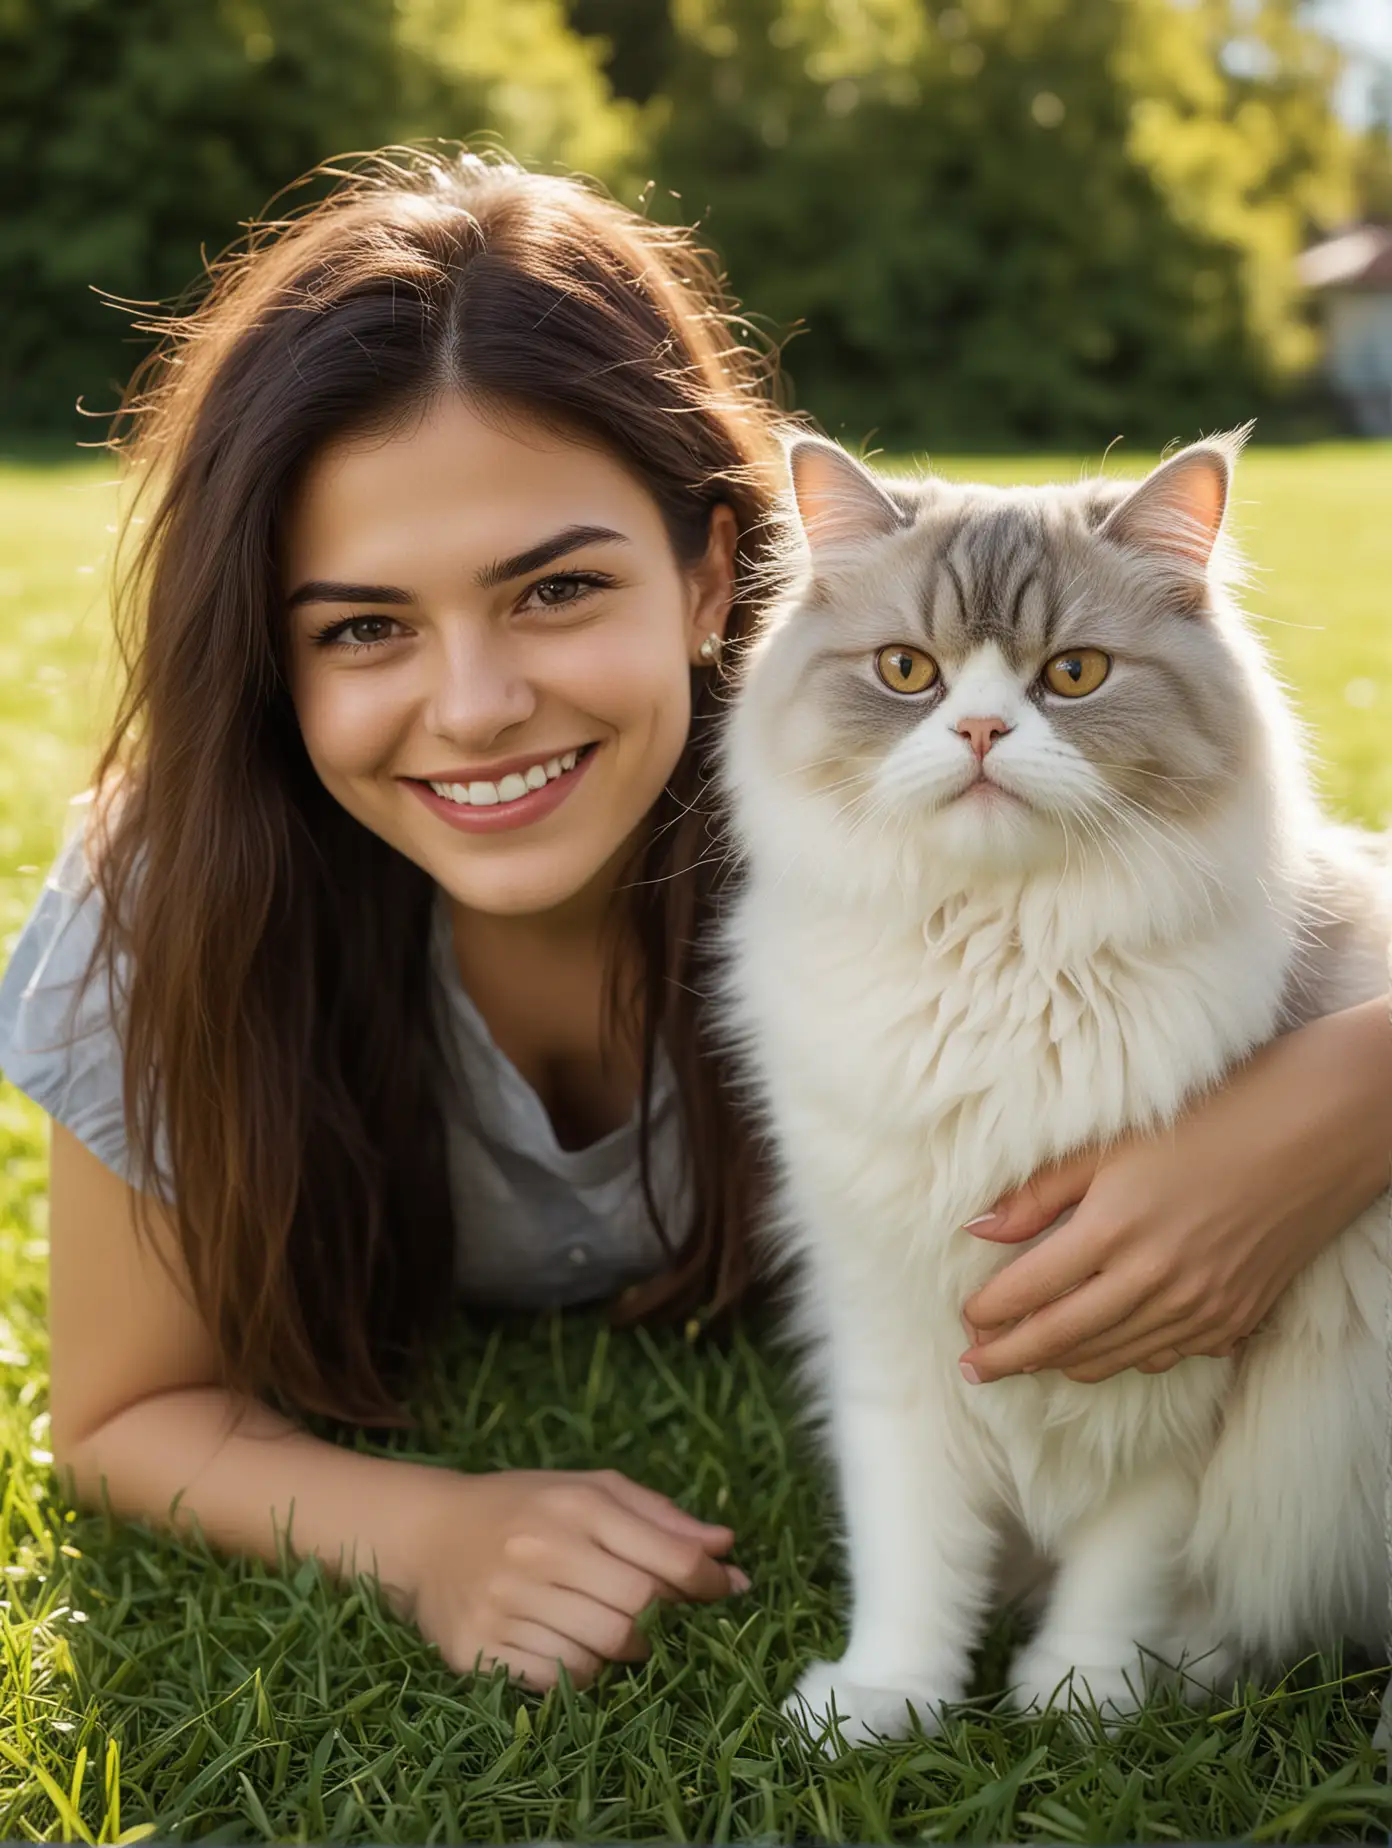 Europeans and Americans, on a sunny day, a beautiful young woman smiles for the camera and takes a photo with a persian cat on the grass outdoors. This photo was shot Sony A7c style using a 35mm f/2 lens for a realistic look.